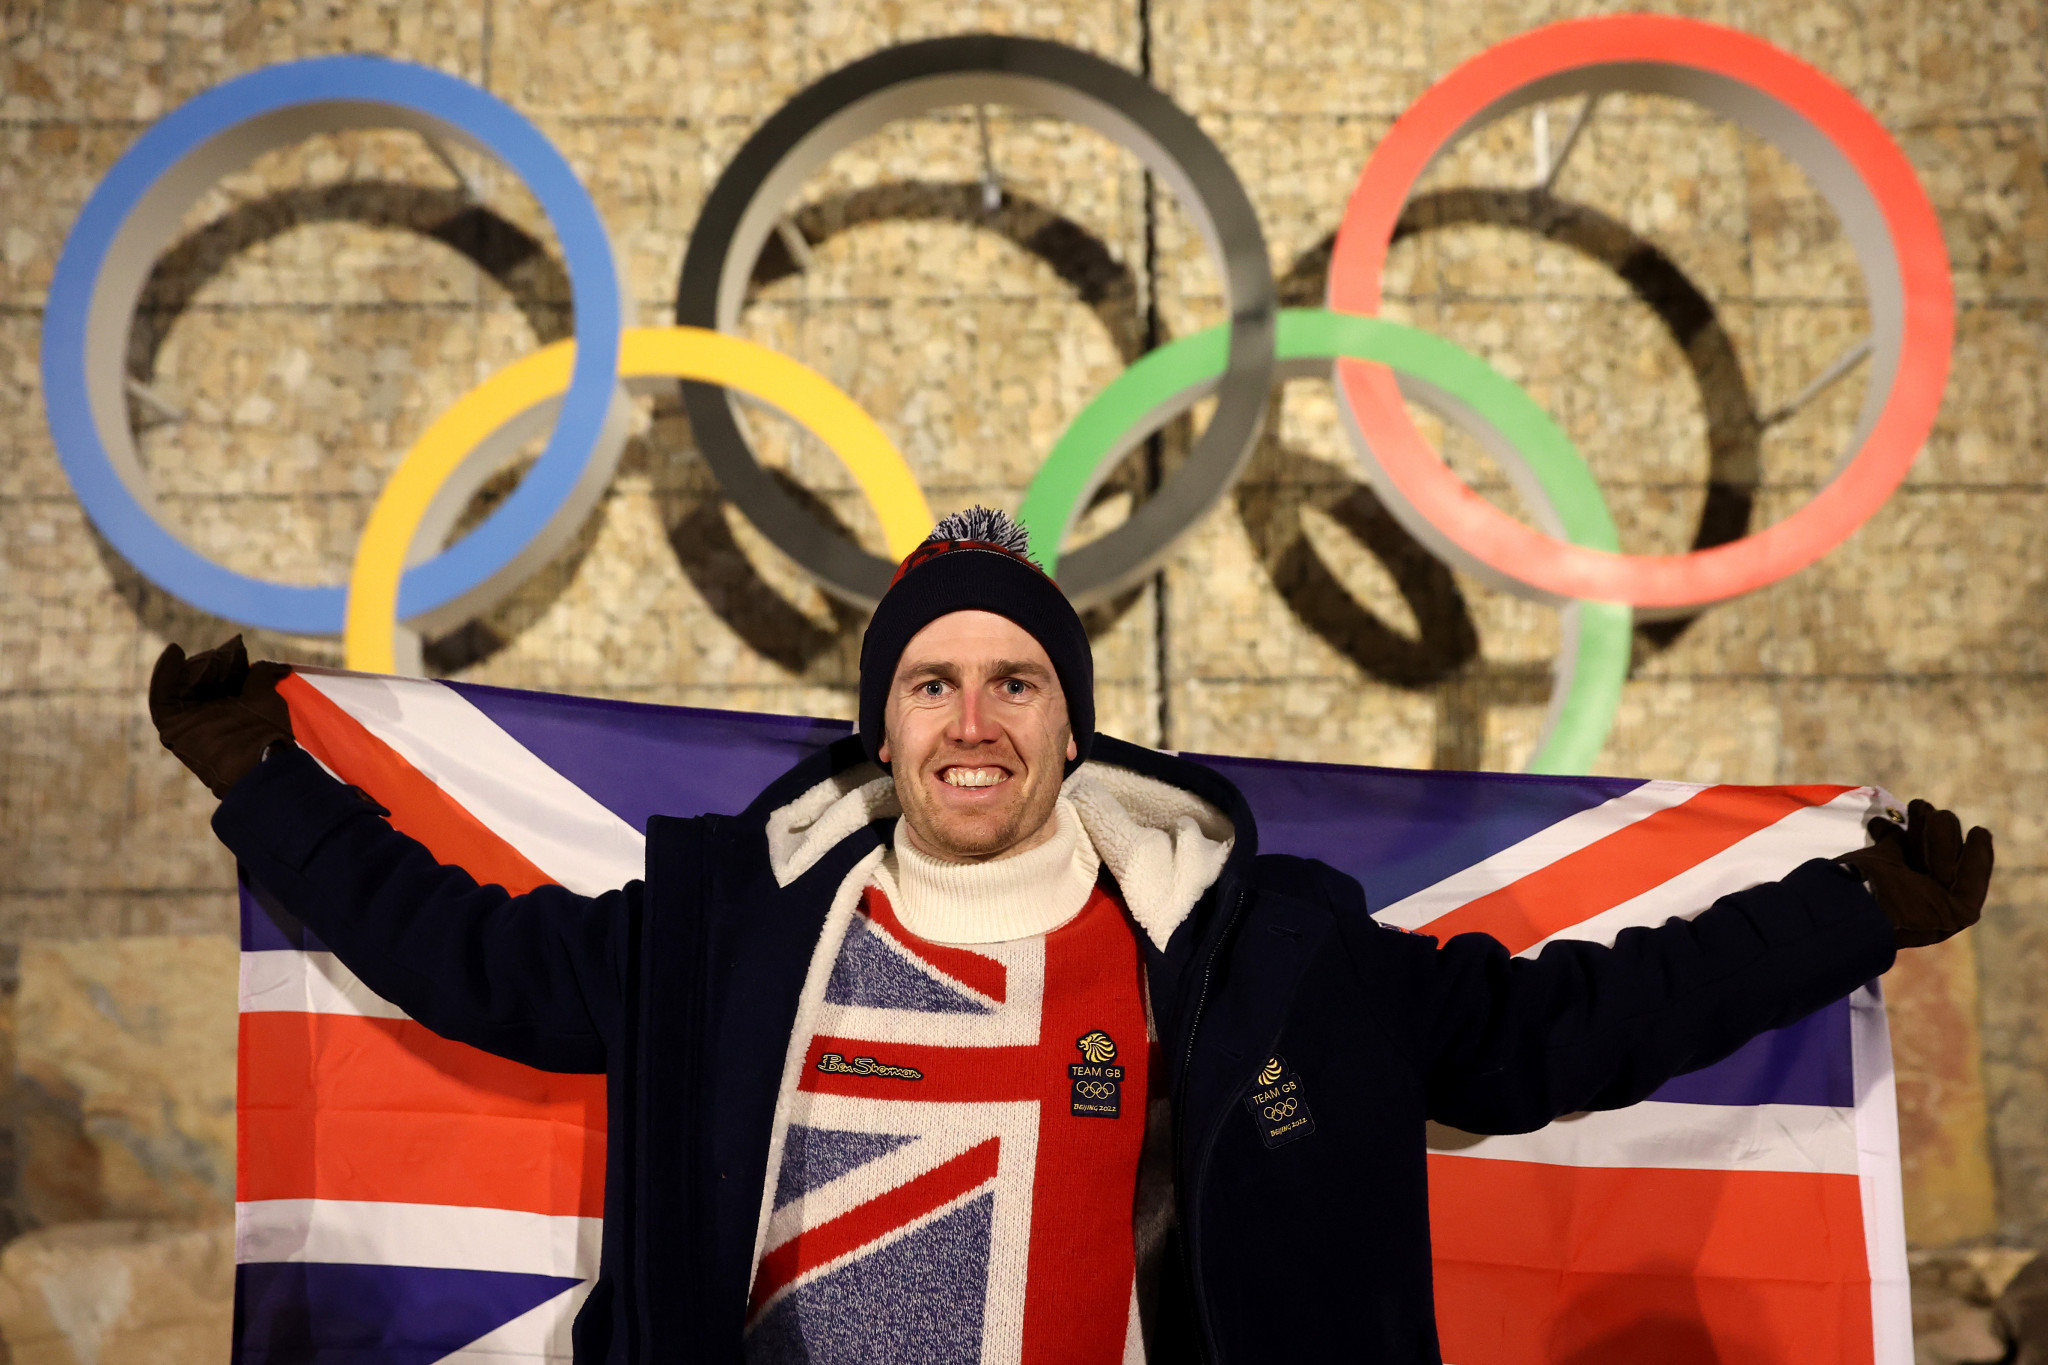 British flagbearer Dave Ryding, the first Briton to win an FIS Alpine Ski World Cup, event has been named as one of Britain's flagbearers for the Beijing 2022 Opening Ceremony ©Getty Images  